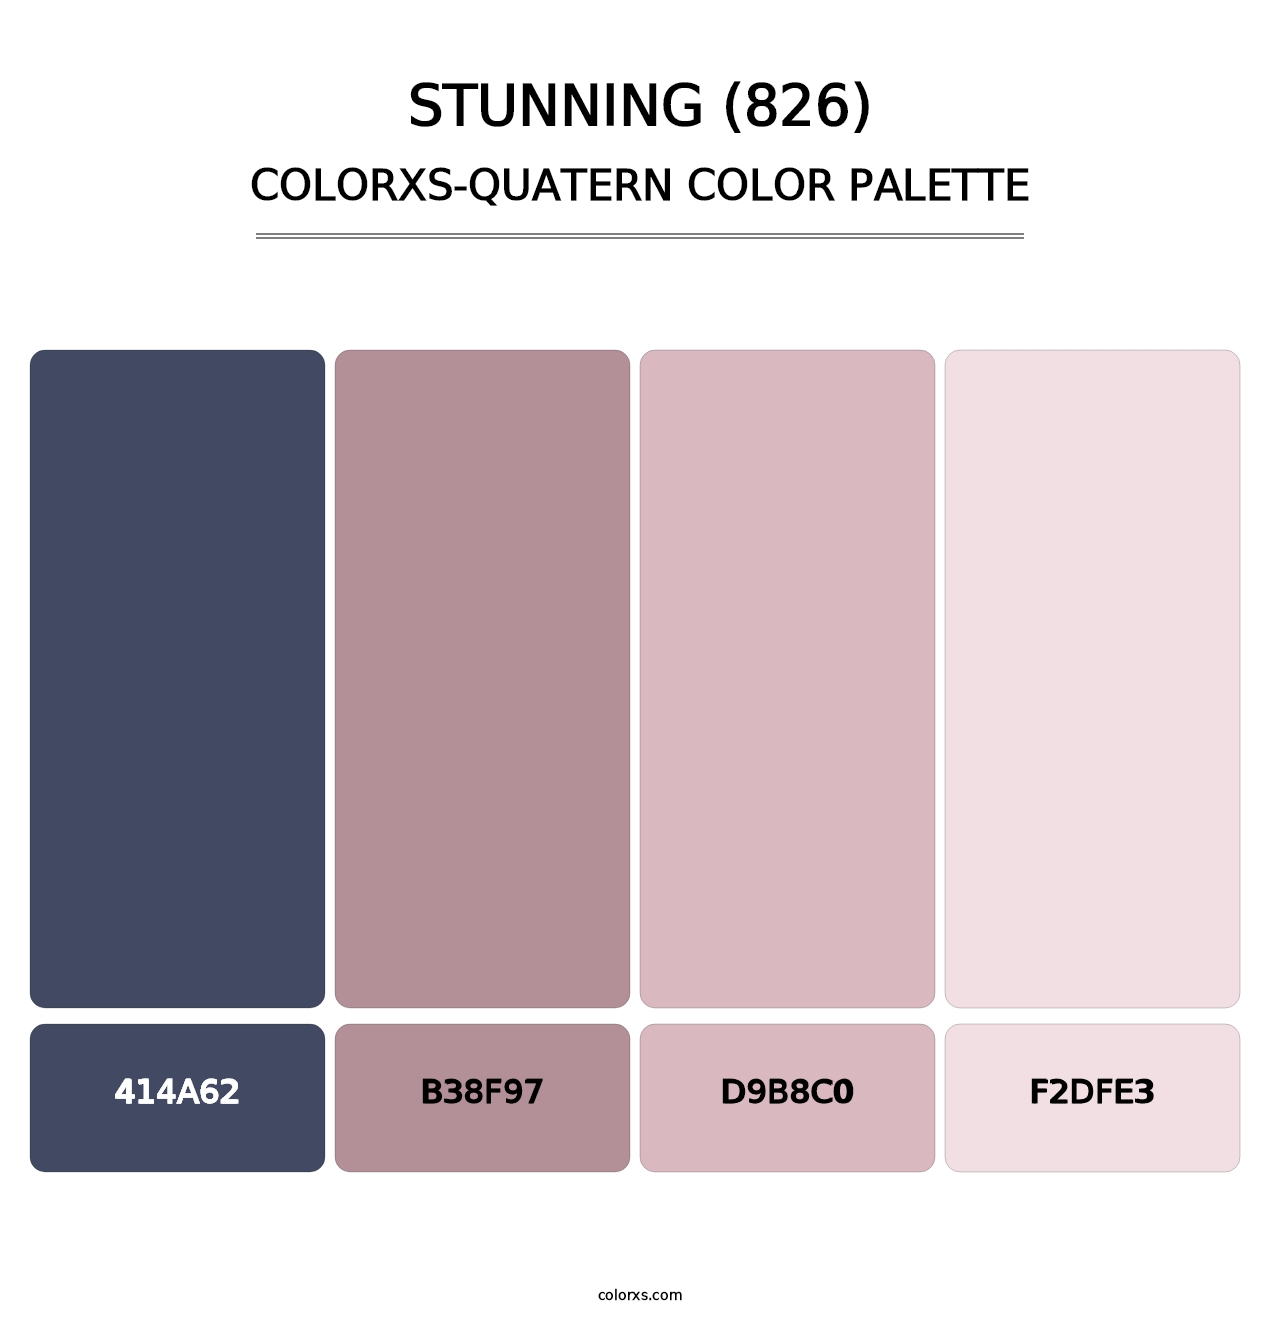 Stunning (826) - Colorxs Quatern Palette